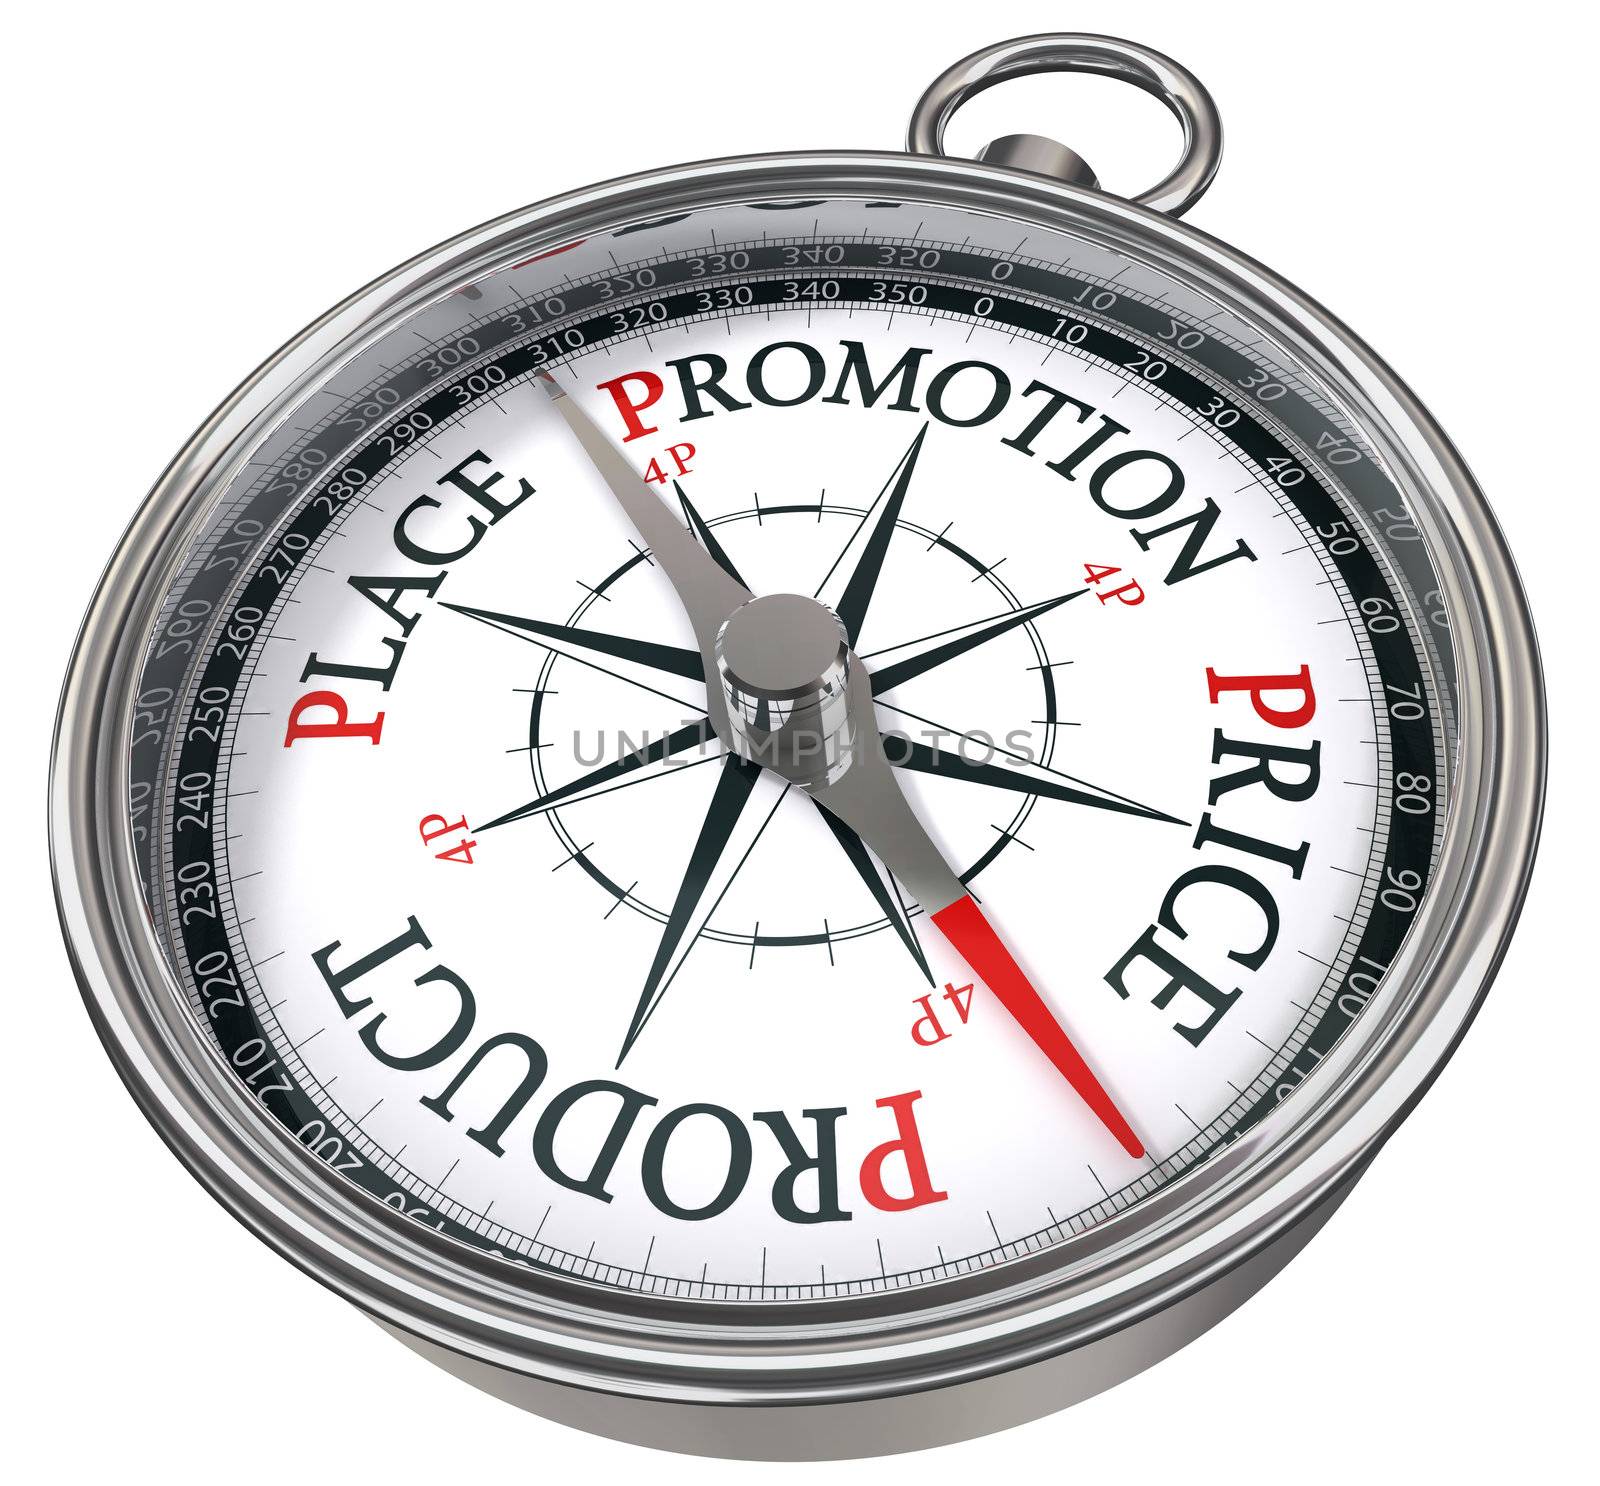 place price product and promotion basic marketing principles on concept compass 